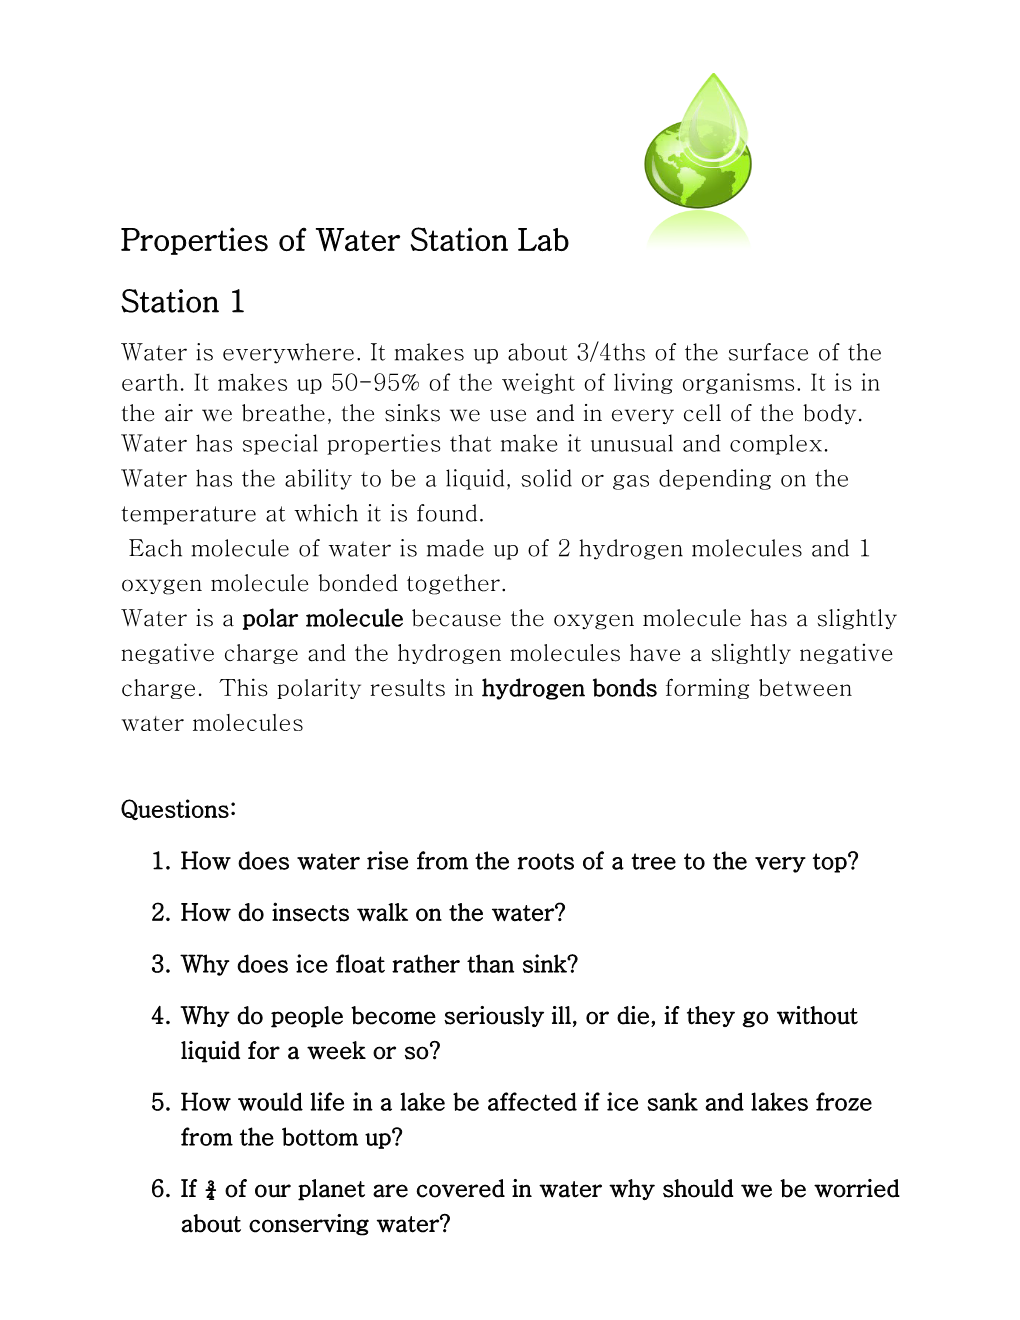 Properties Of Water Station Lab